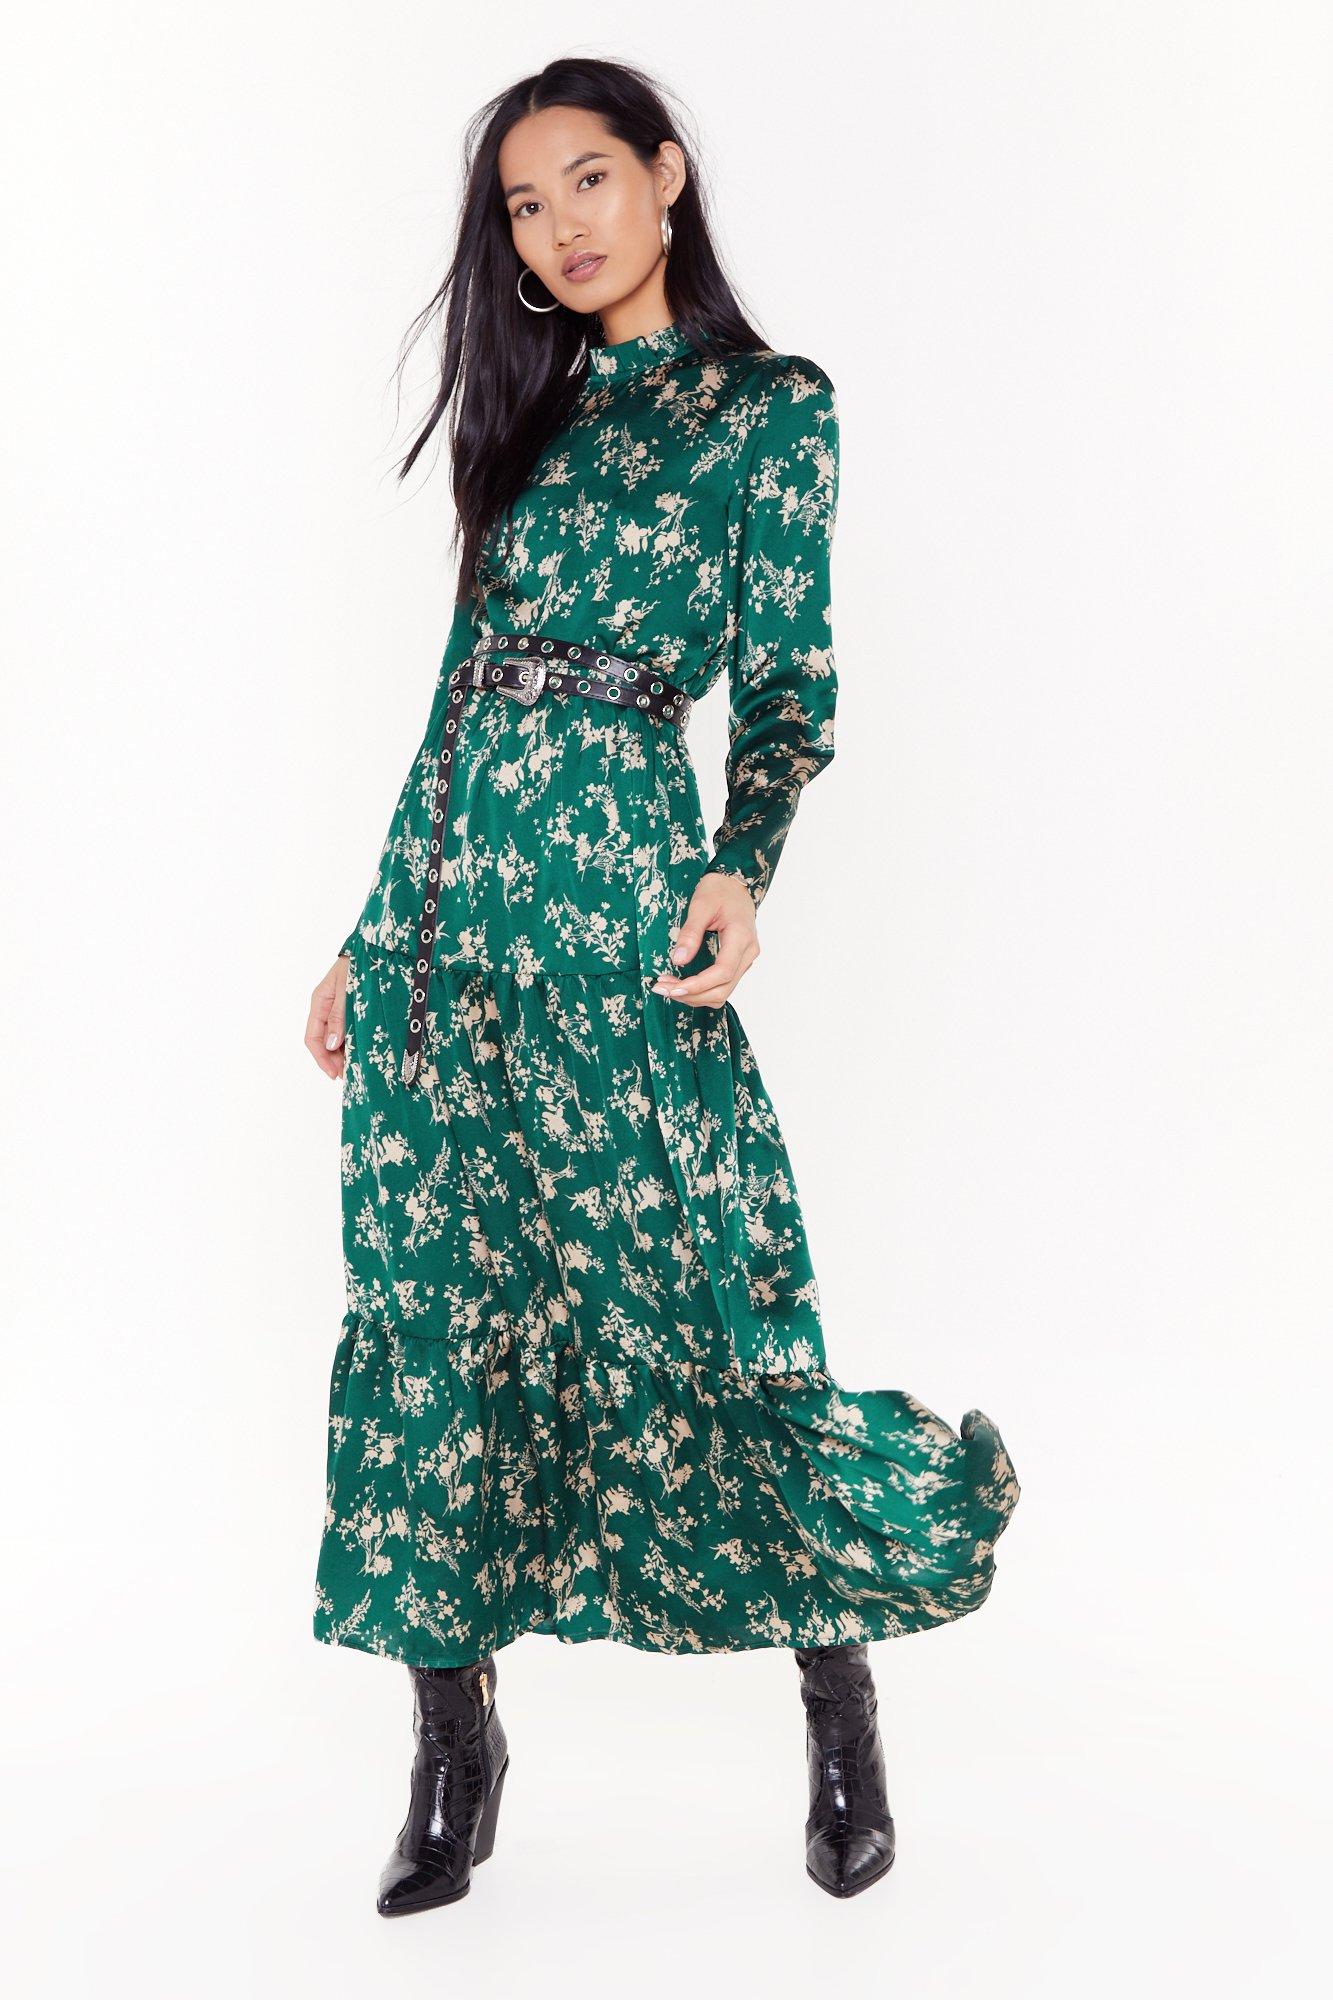 floral maxi with sleeves